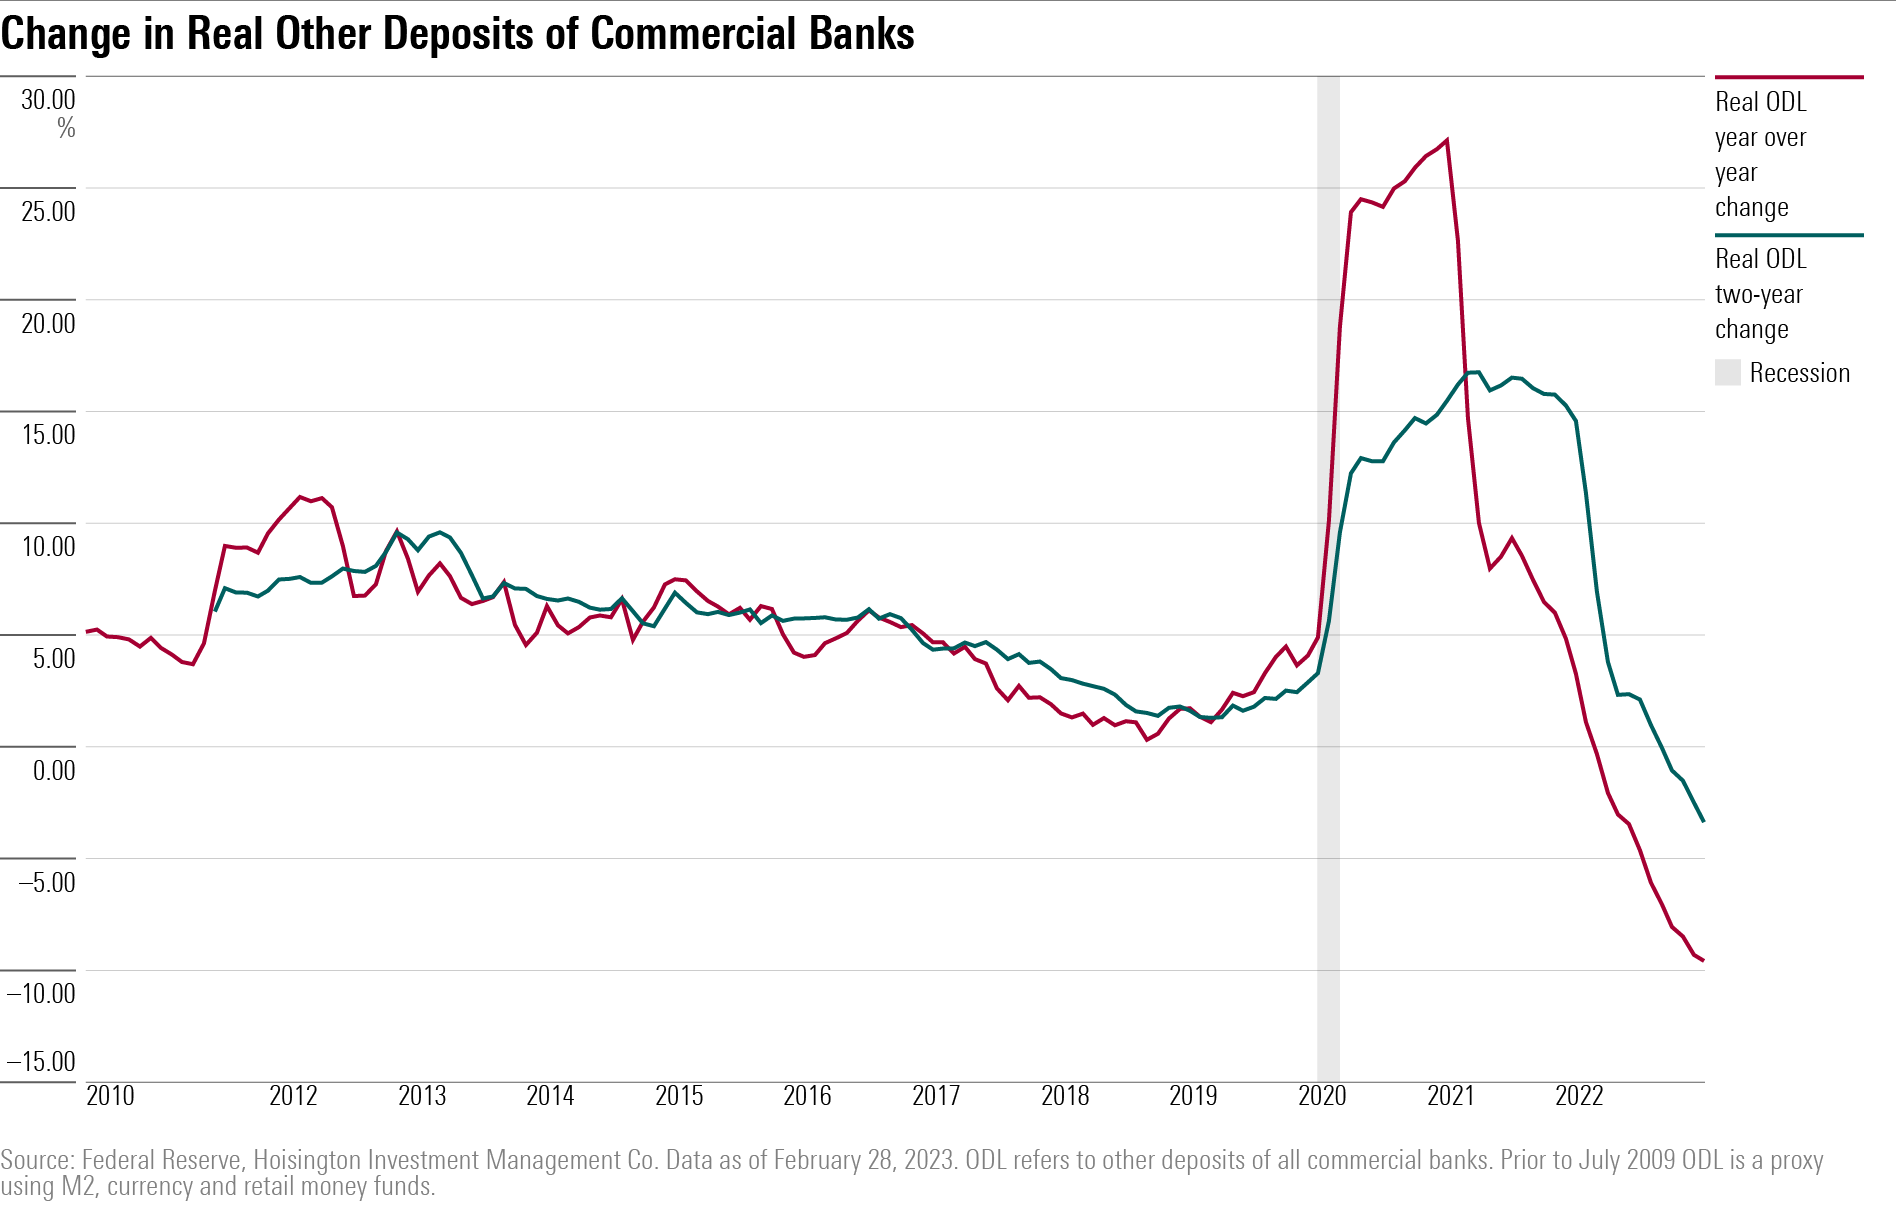 Line chart showing Change in Real Deposits of Commercial Banks